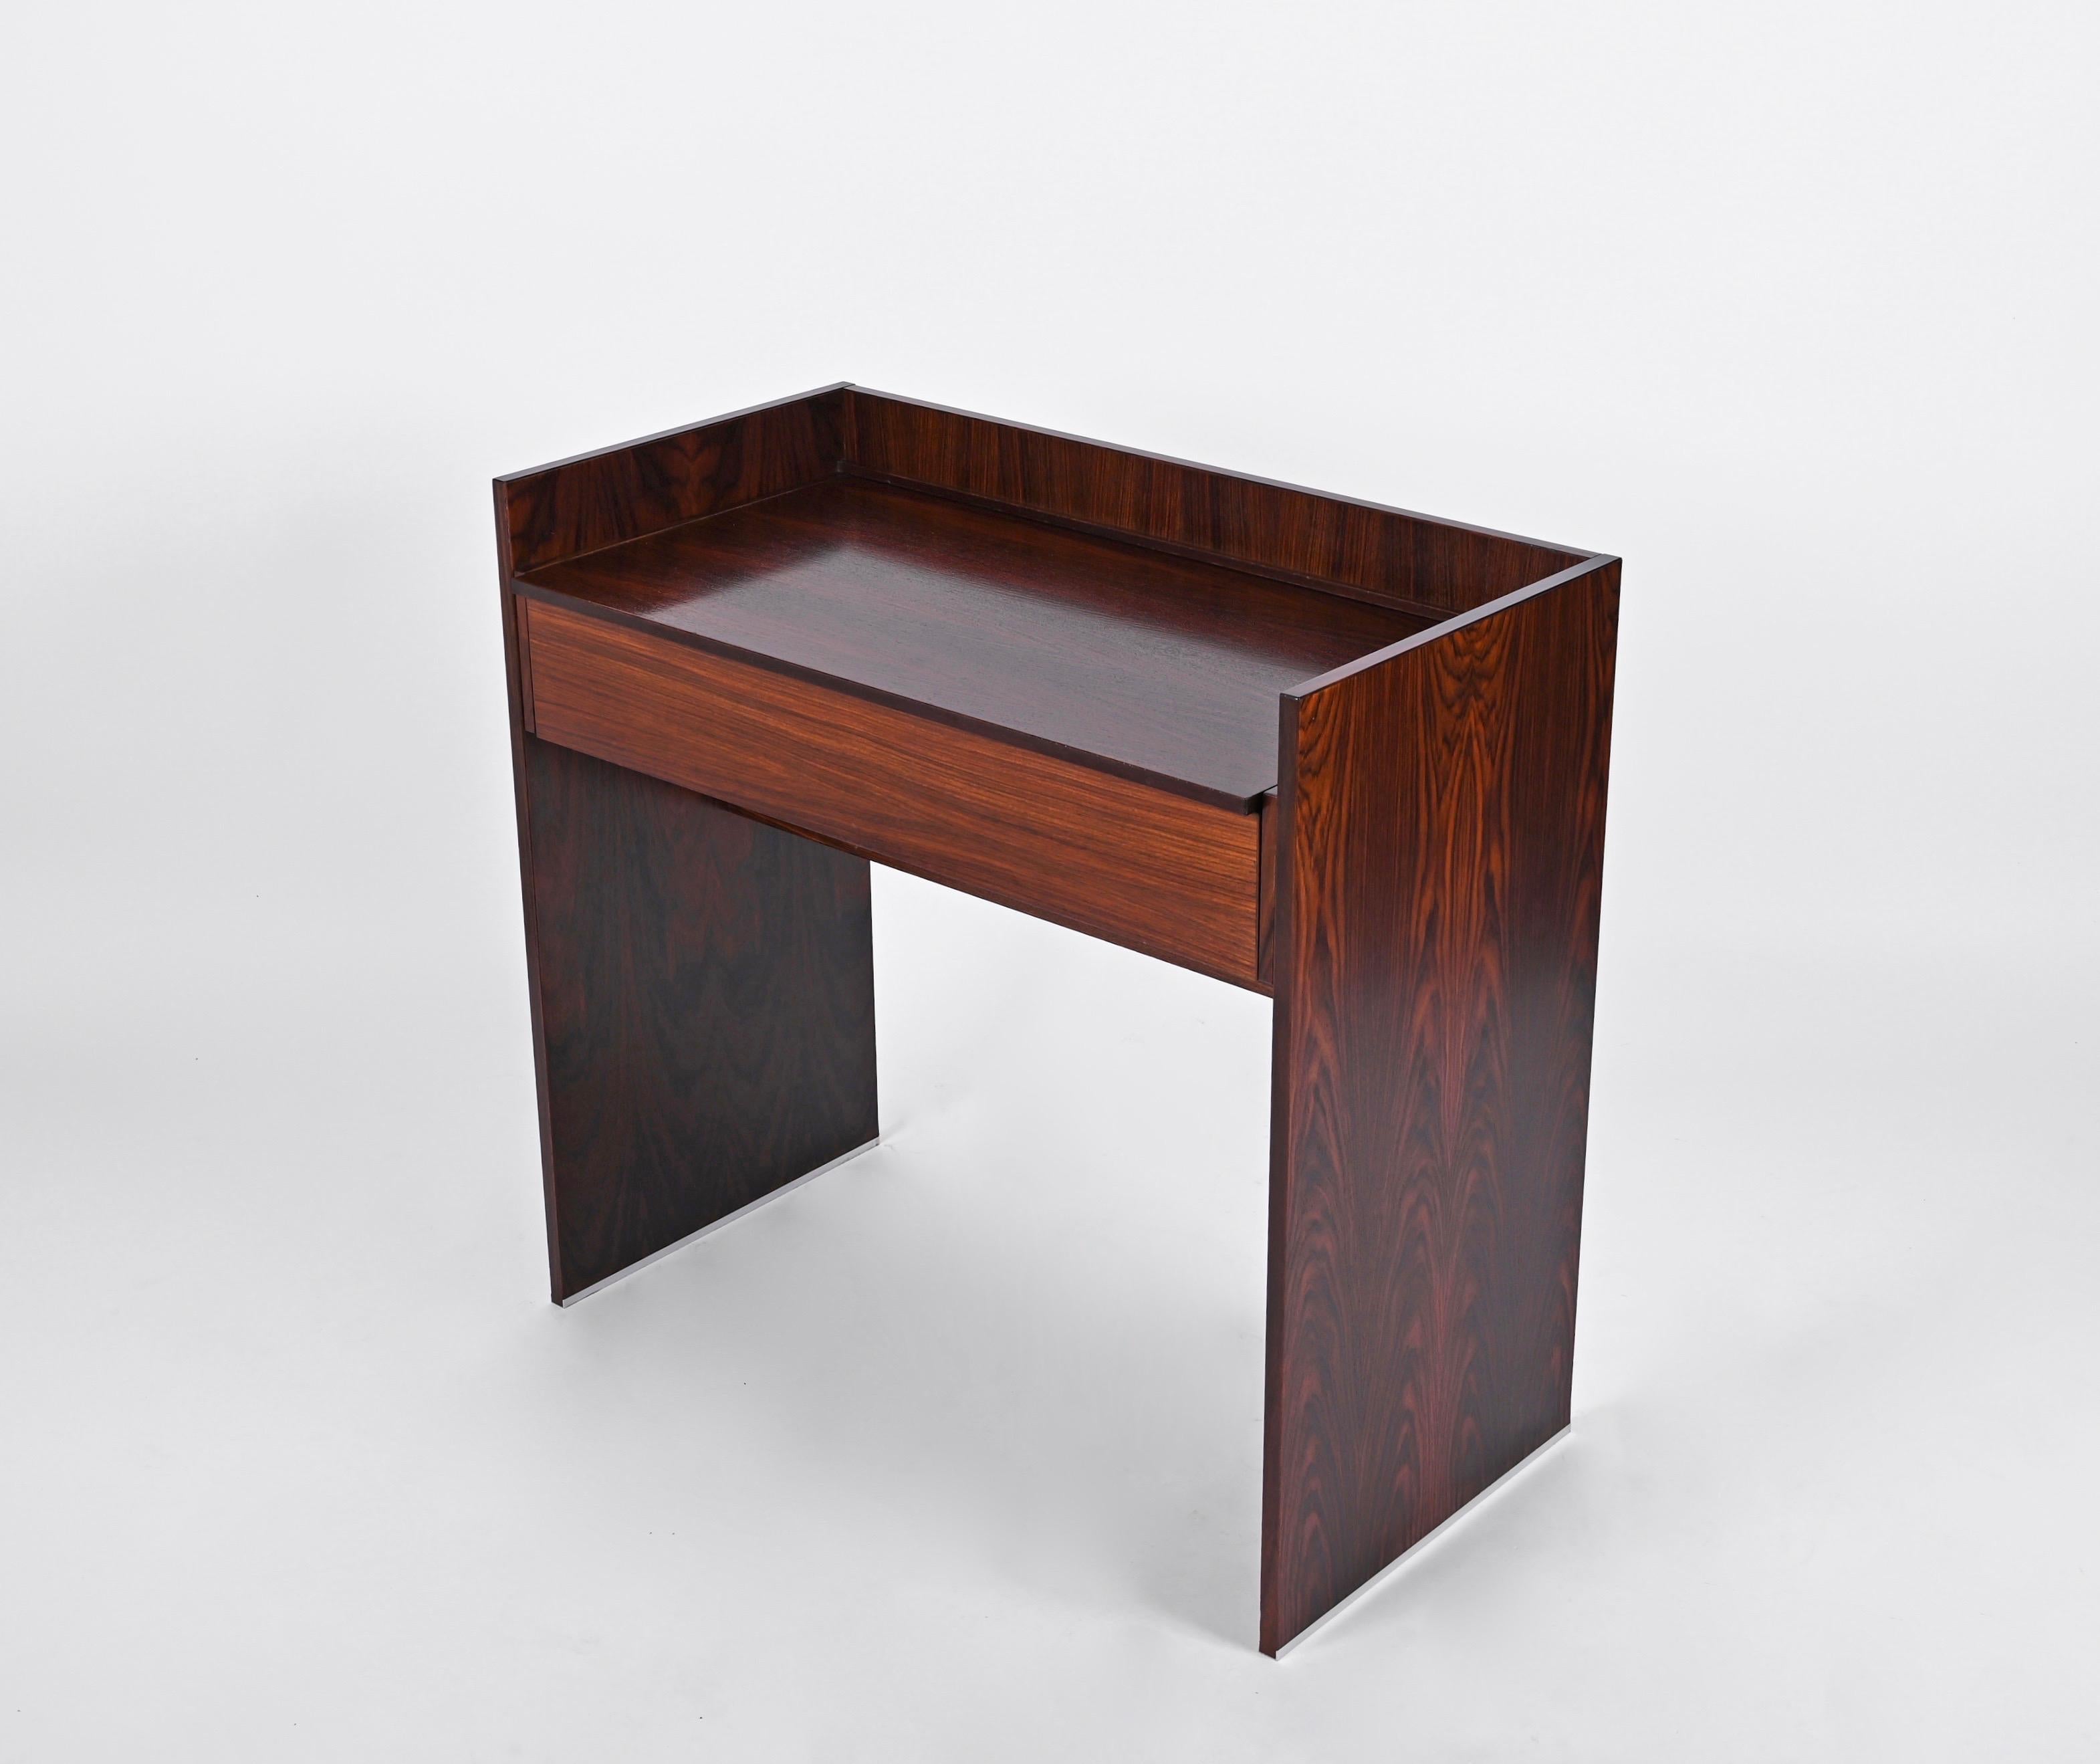 Fabulous Italian vanity table designed by Ico Parisi and produced by MiM in italy in the 1960s.

The quality of the wood used by MiM on this piece is outstanding and the simple straight lines drew enhance the class of this gorgeous vanity desk. This